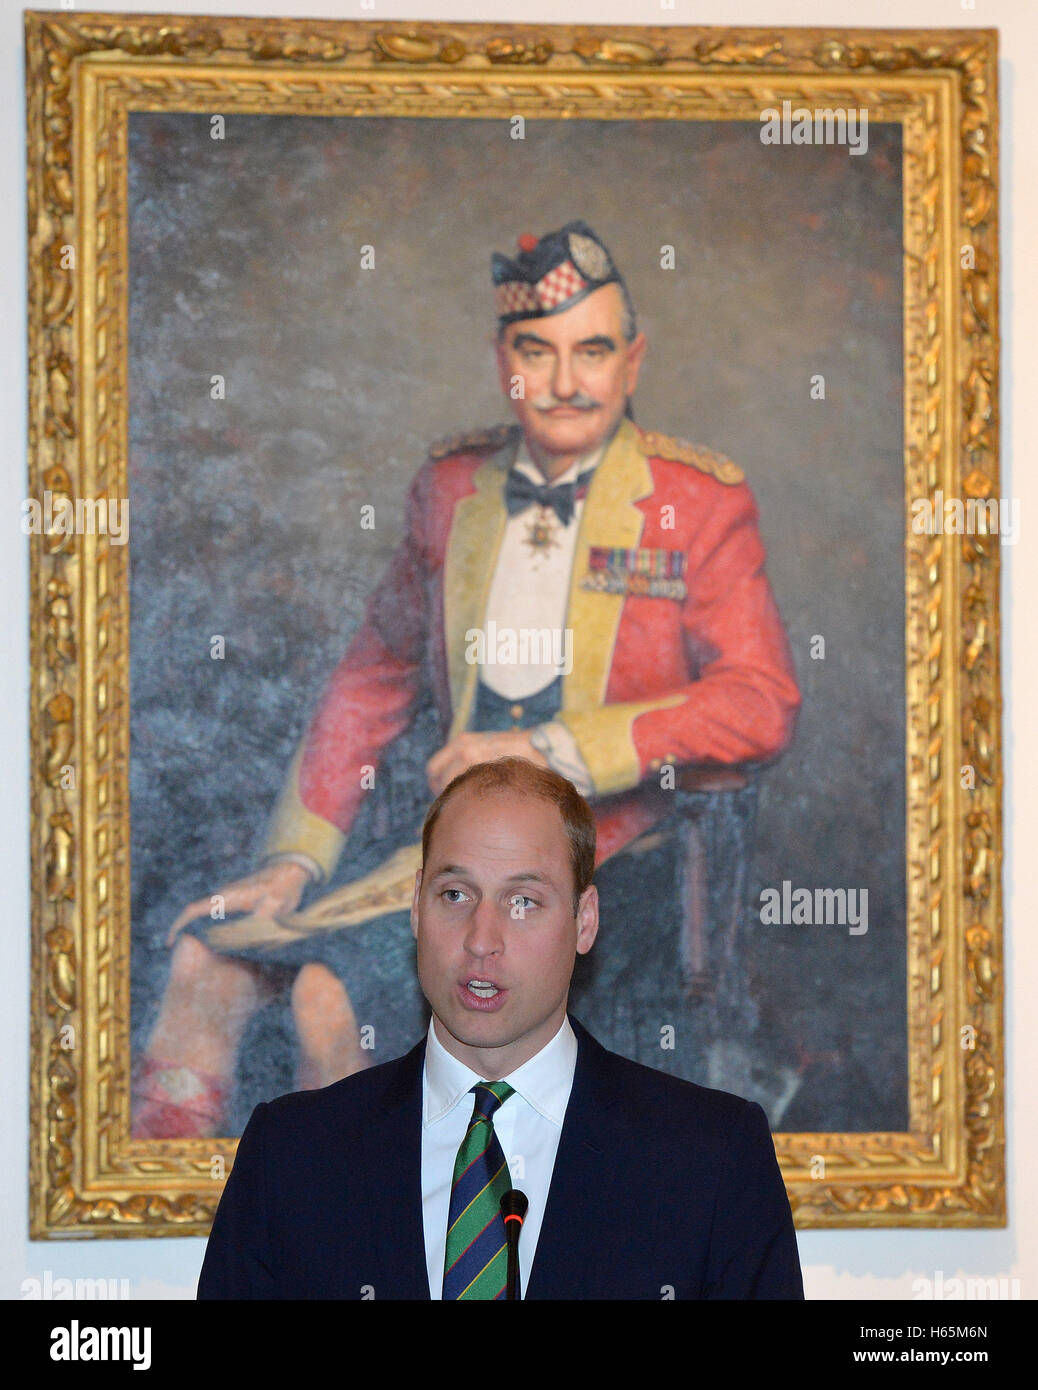 The Duke of Cambridge, known as the Earl of Strathearn in Scotland, speaks during a visit to Argyll and Sutherland Highlanders Regimental Museum at Stirling Castle. Stock Photo